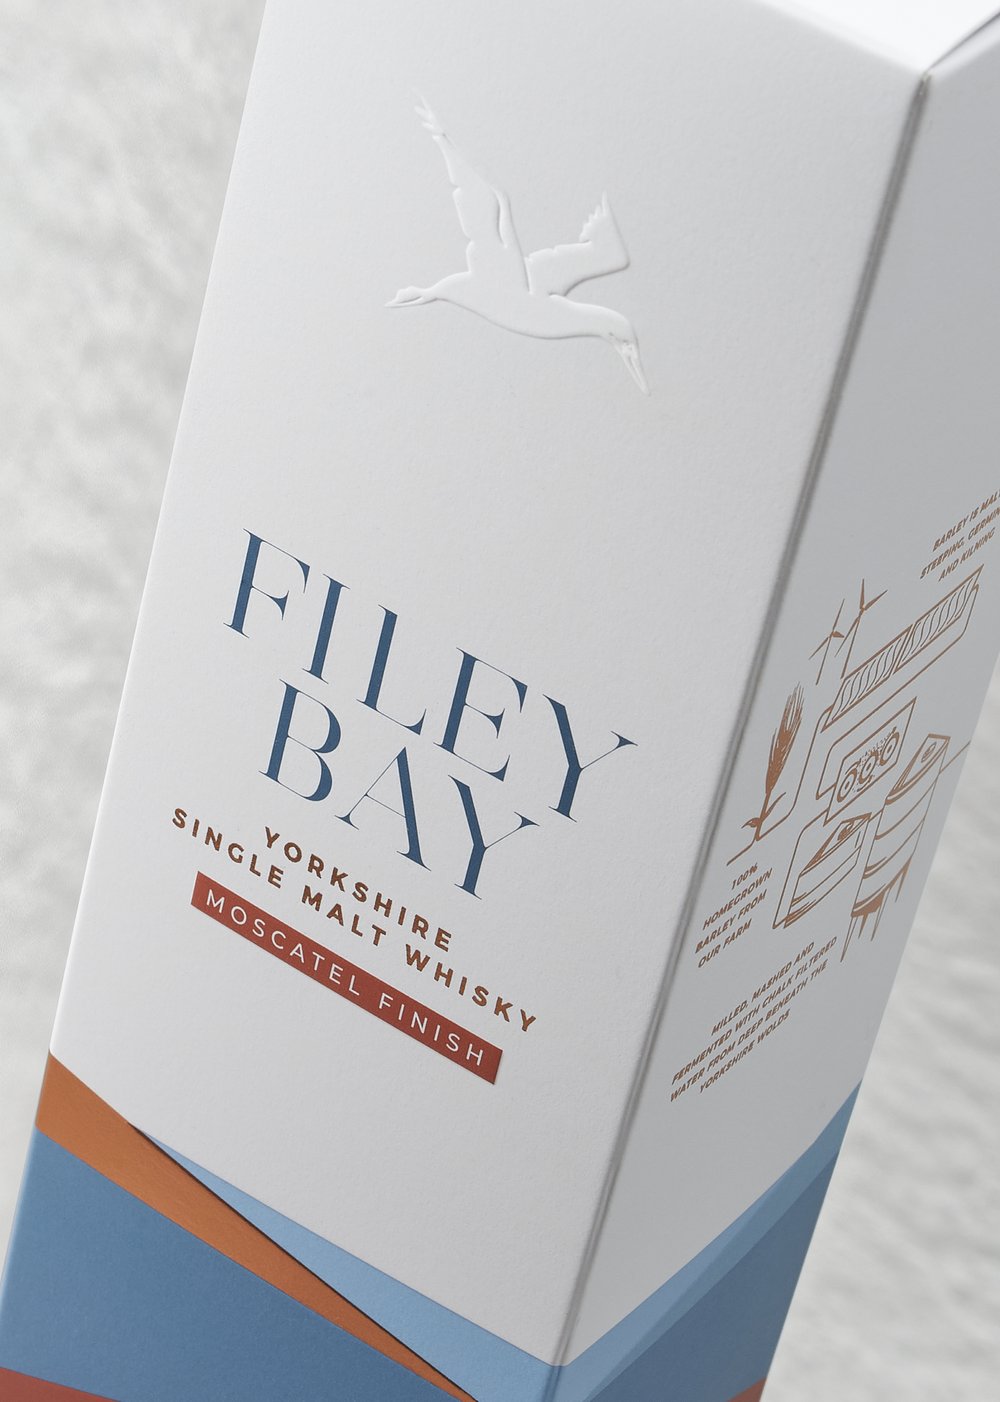  Filey Bay whisky bottle packaging carton photographed on an angle close-up 